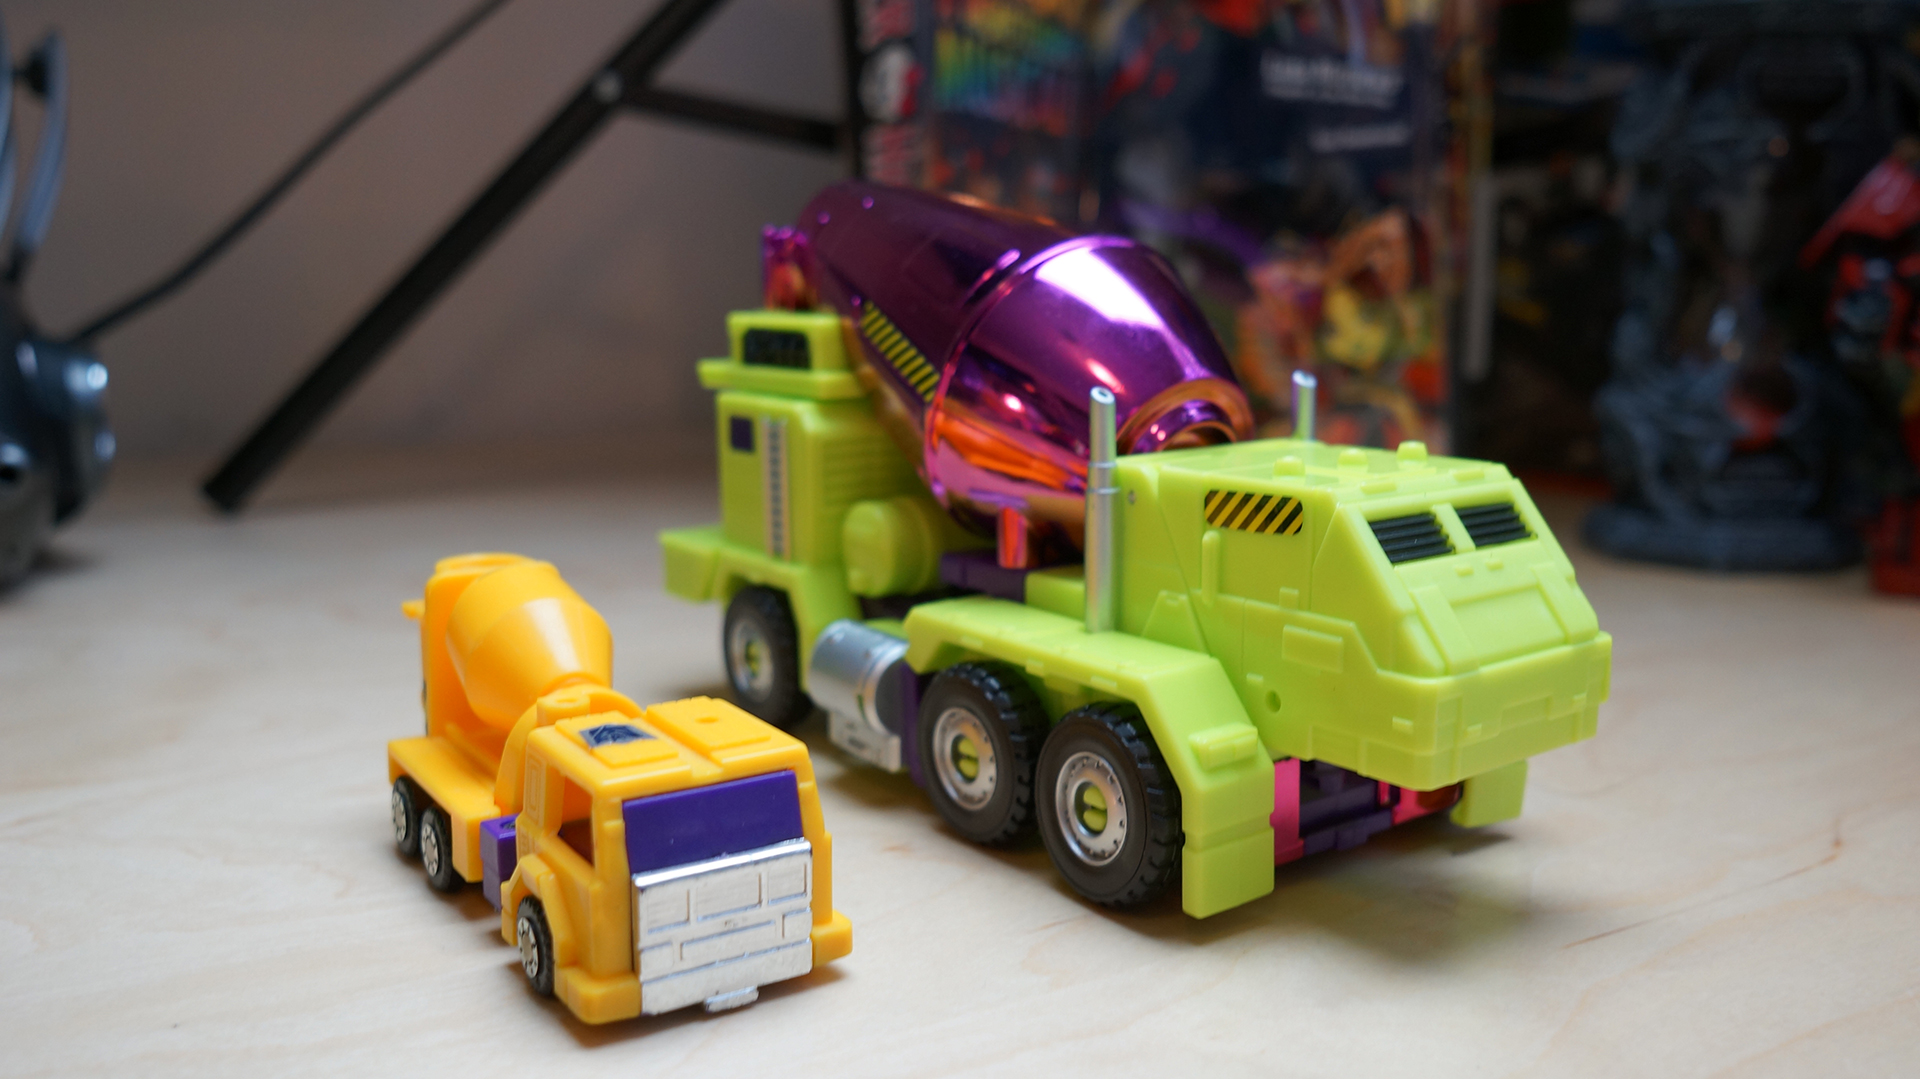 The Original Transformers Combiner Is Back And Bigger Than Ever